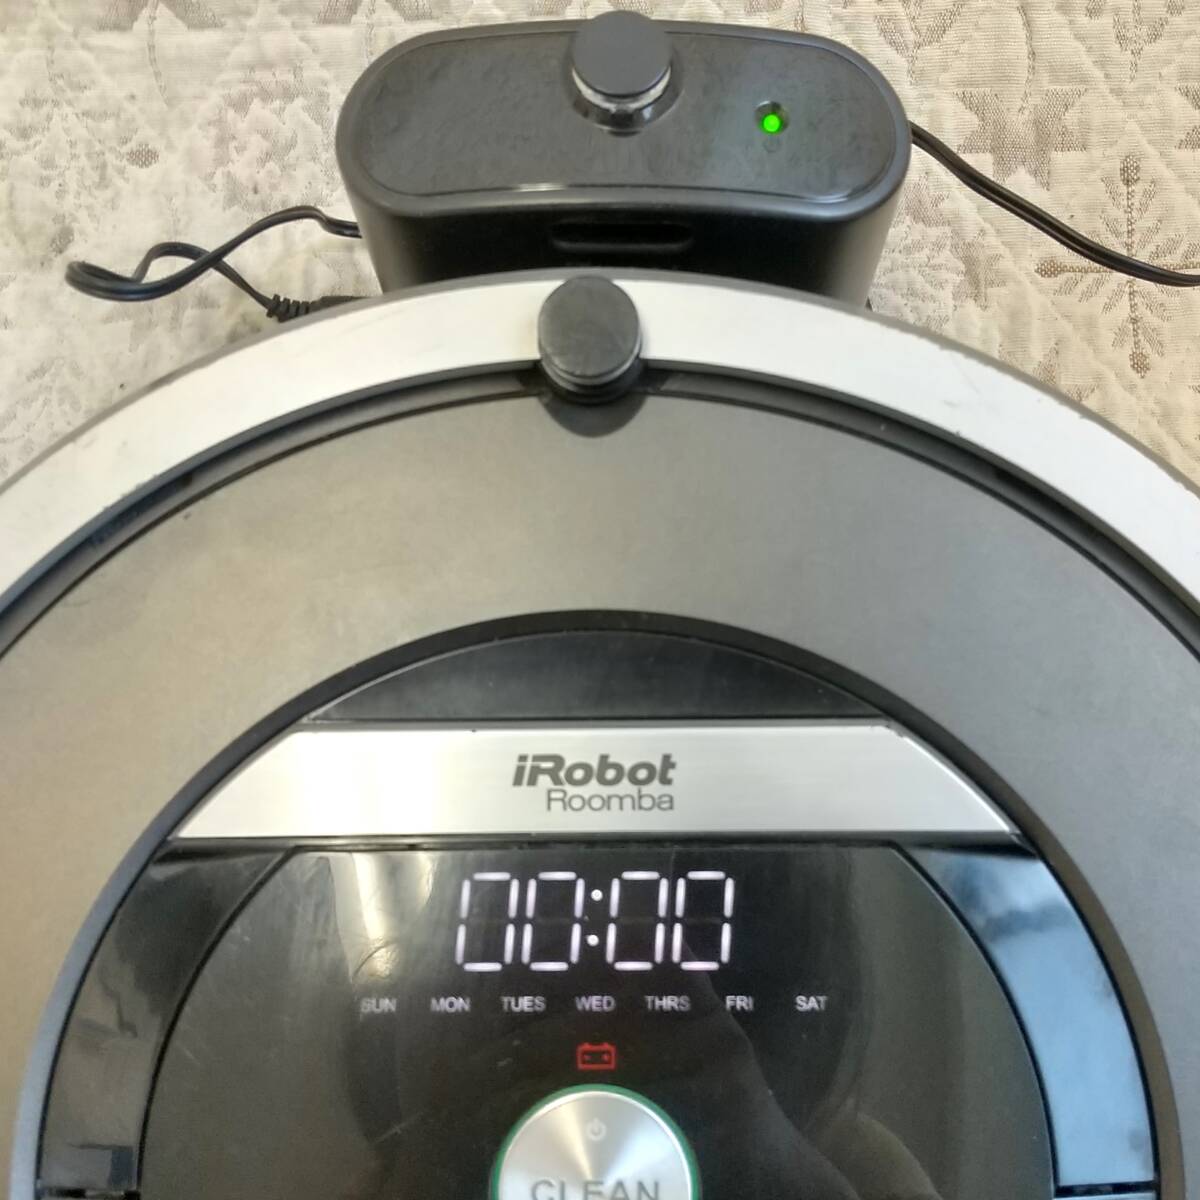 [771] secondhand goods 2015 year made I robot roomba 870